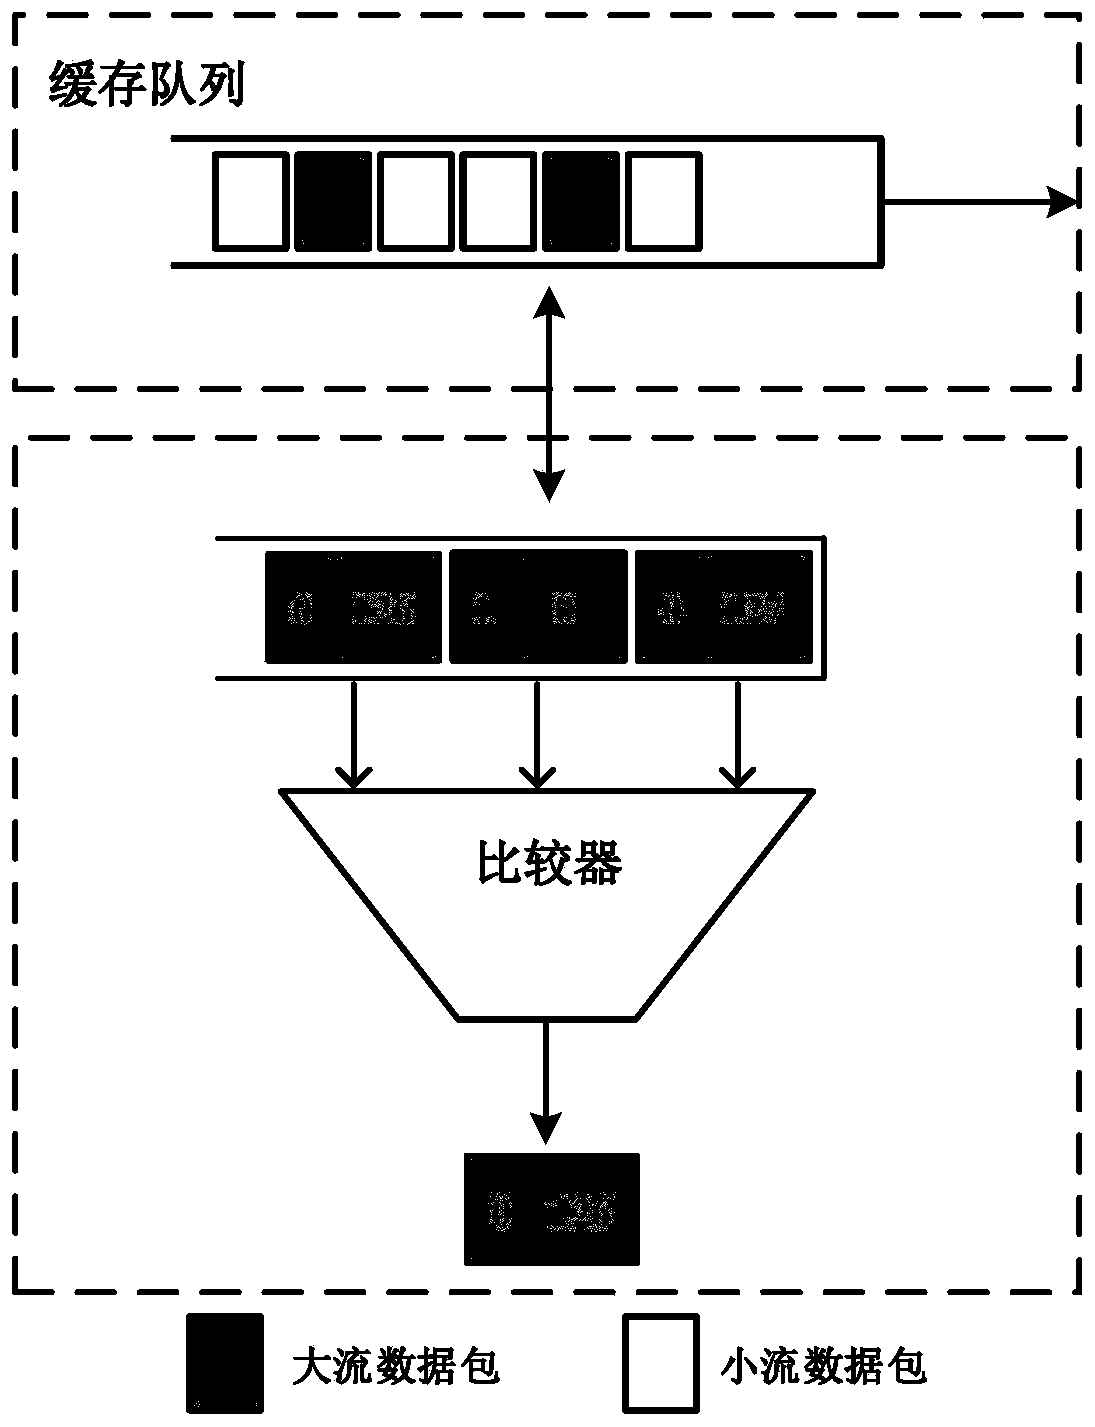 SDN-based large flow load balancing system and method